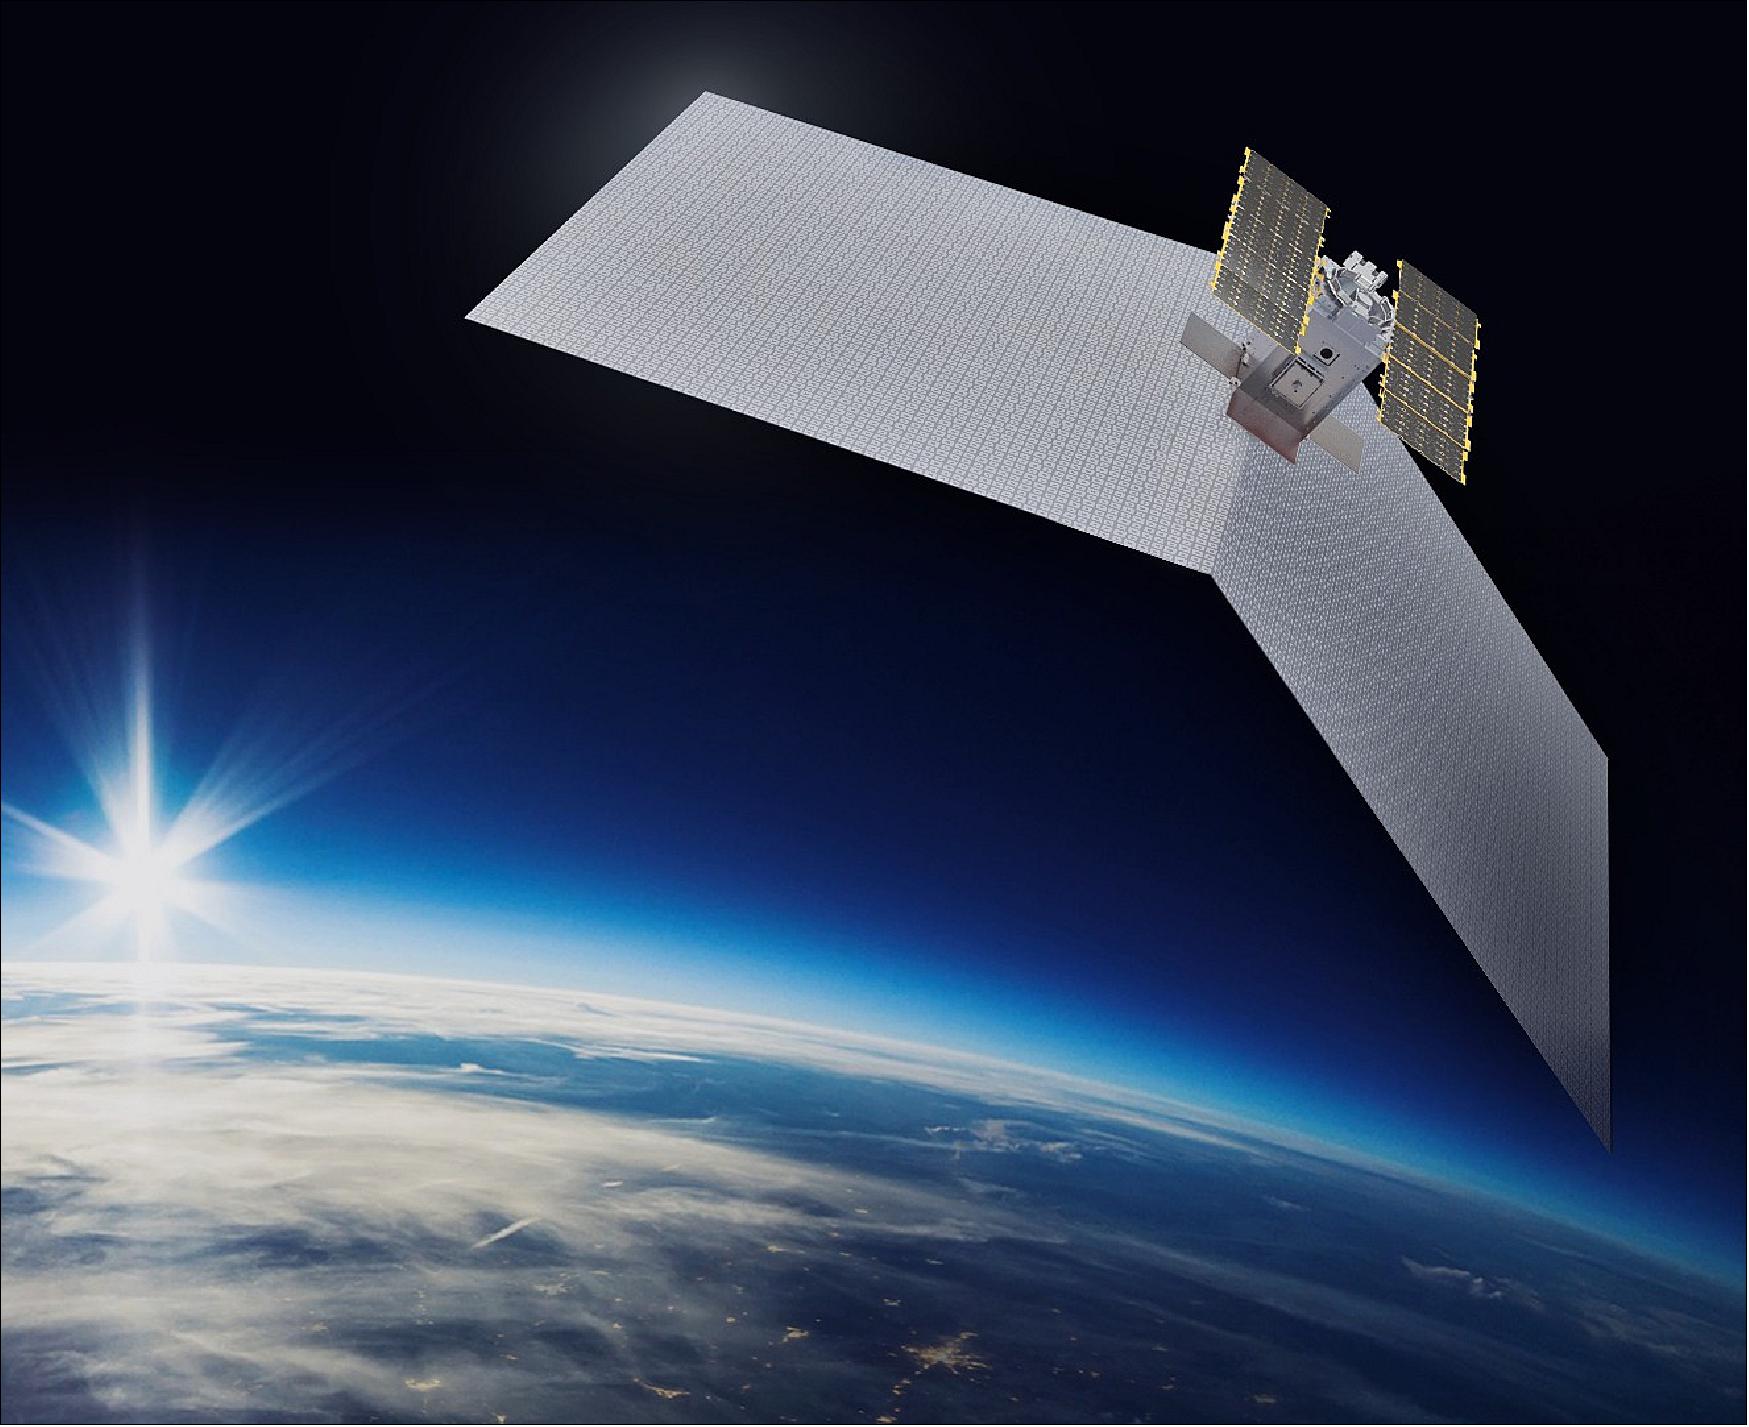 Figure 5: Artist's rendition of the deployed Capella small satellite. The spacecraft is using an origami-like antenna that unfolds to 8 m2 (image credit: Capella Space)